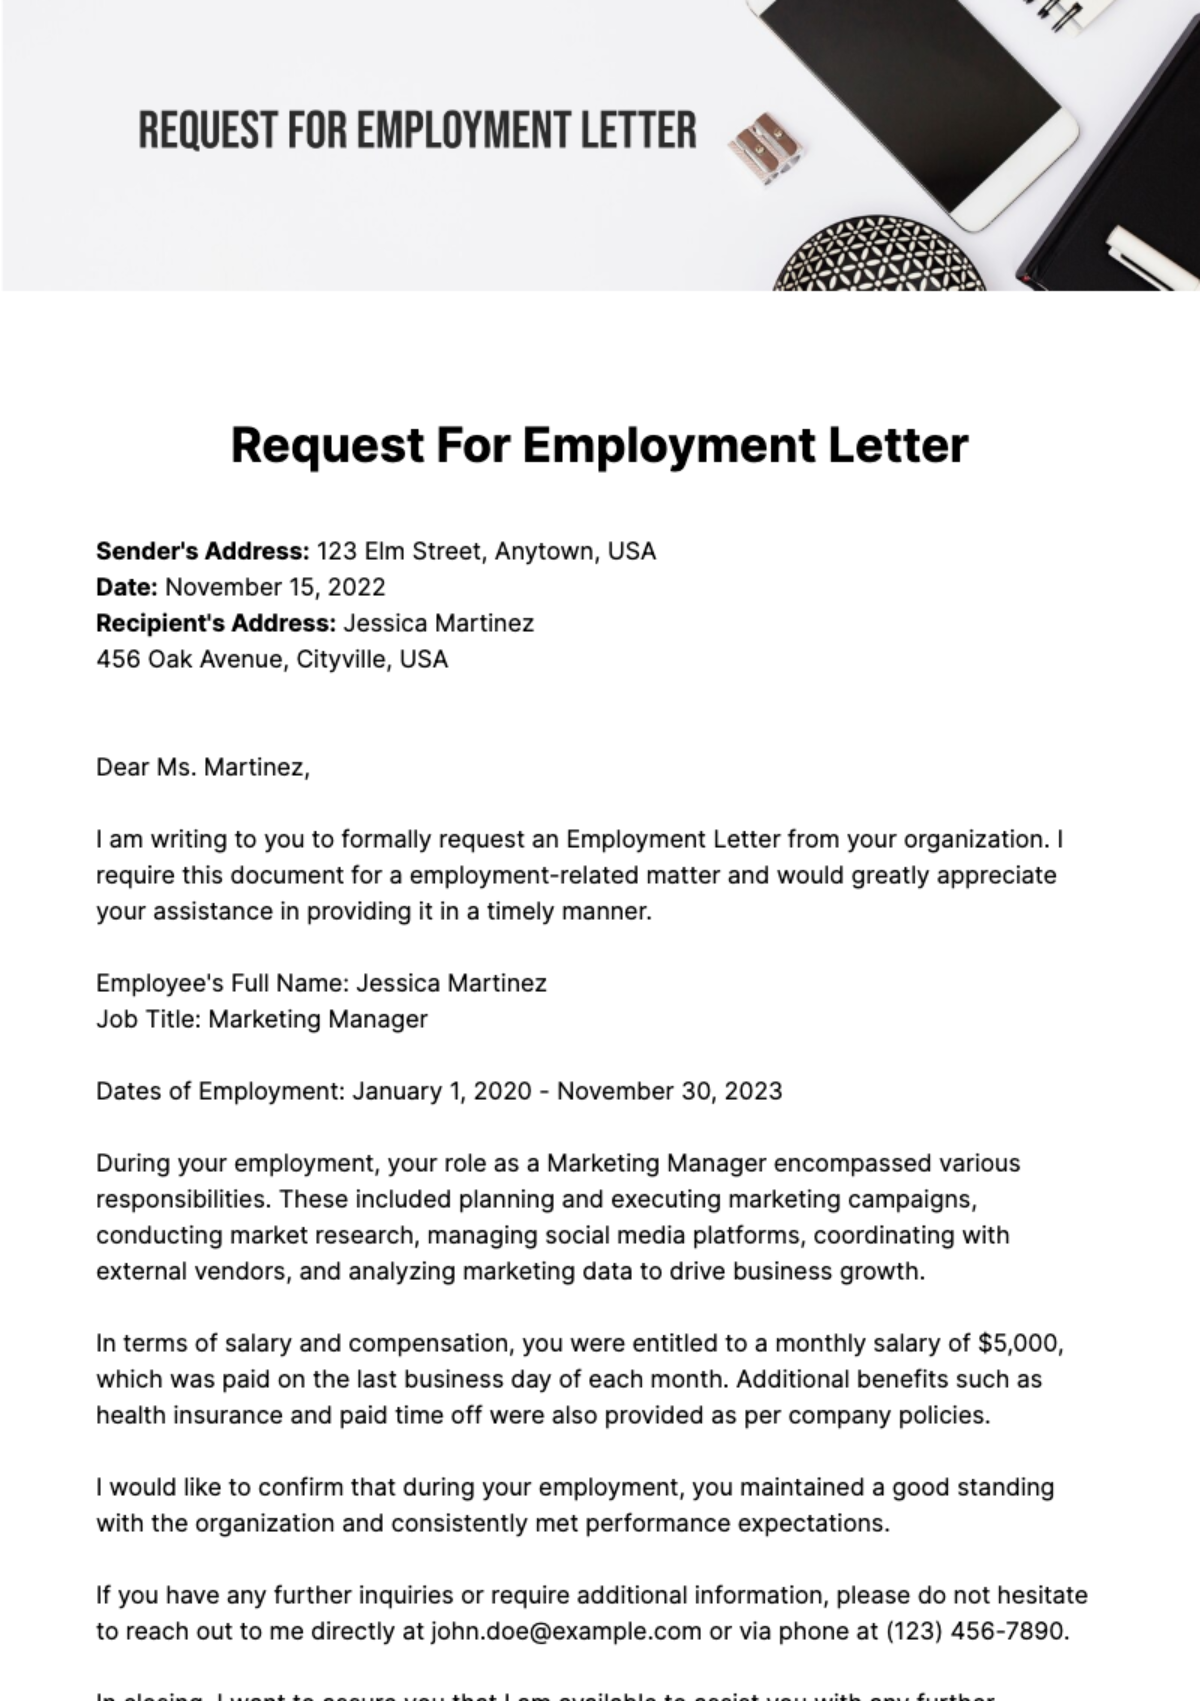 Request For Employment Letter Template